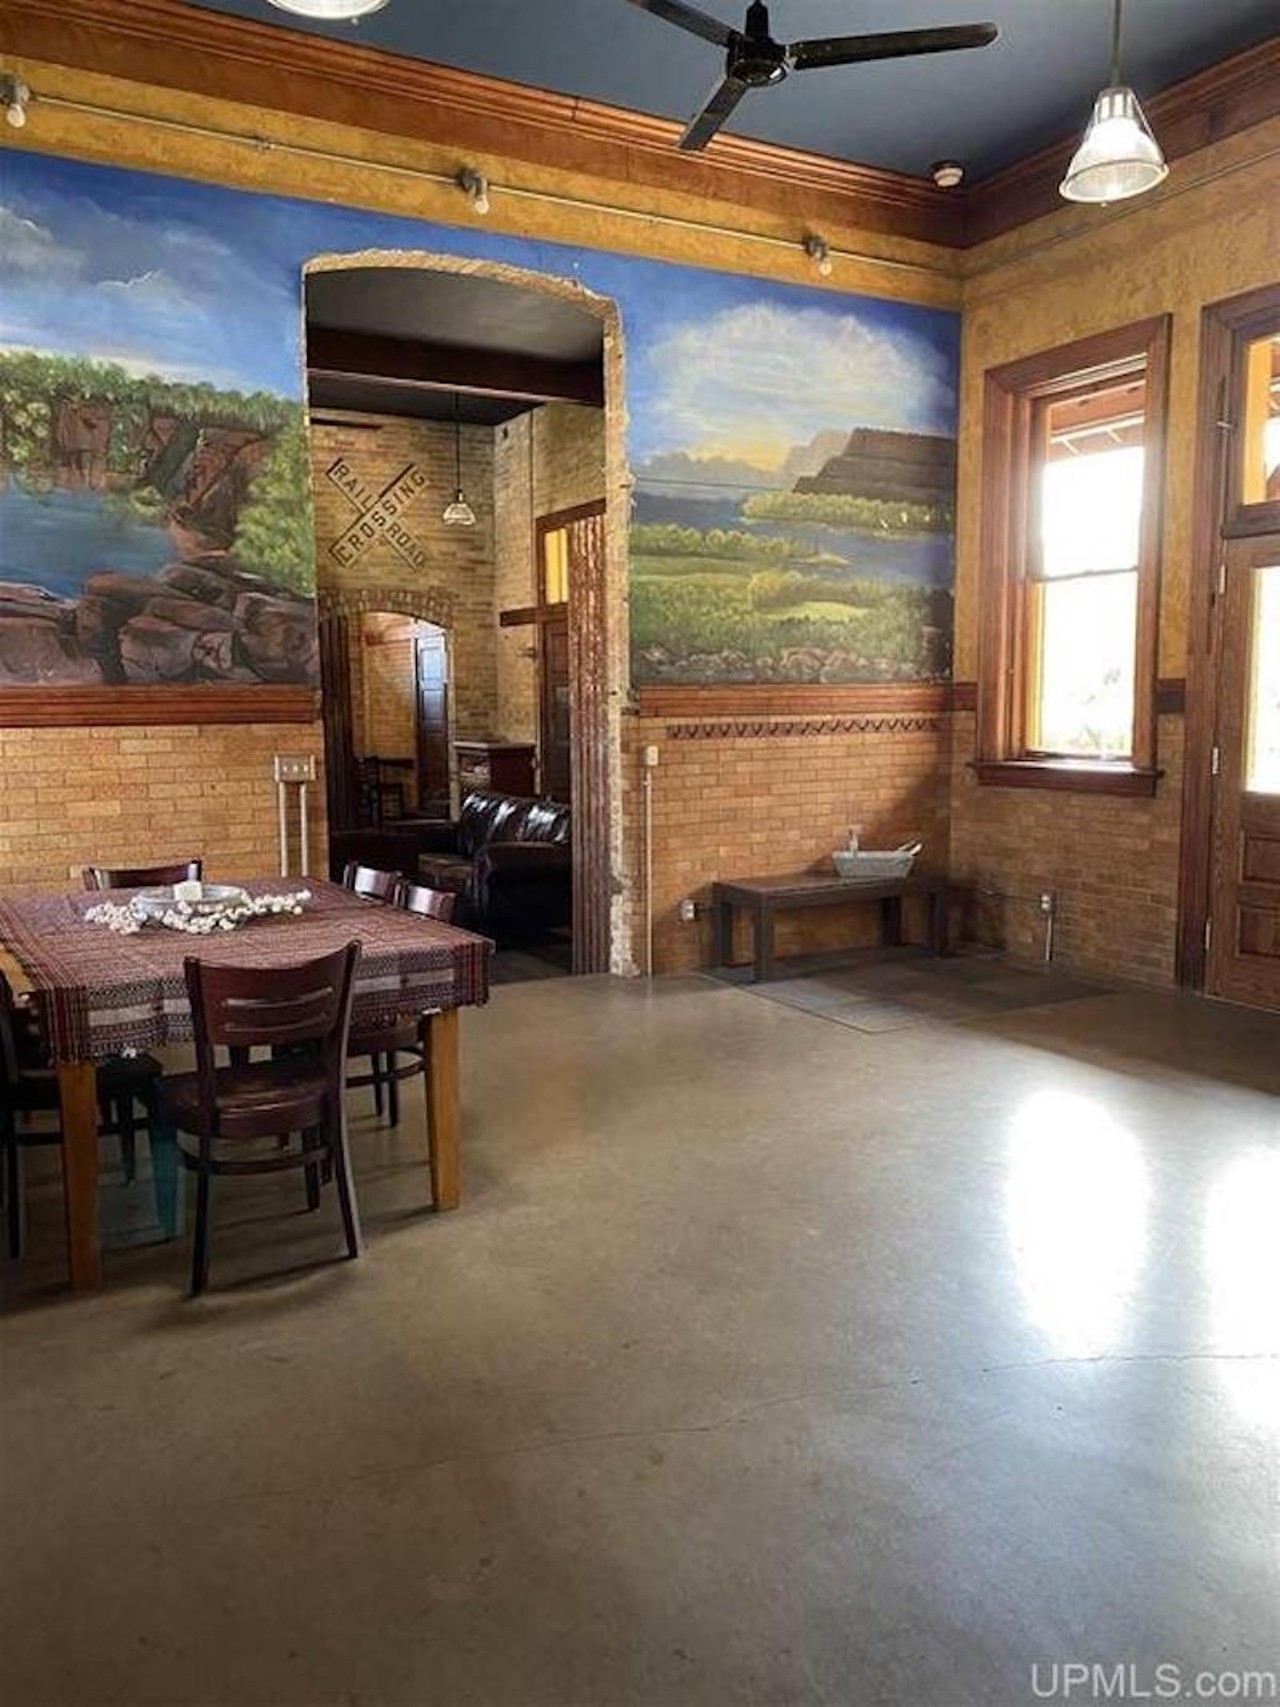 You can now live in a historic train depot in the U.P. for $324.9k